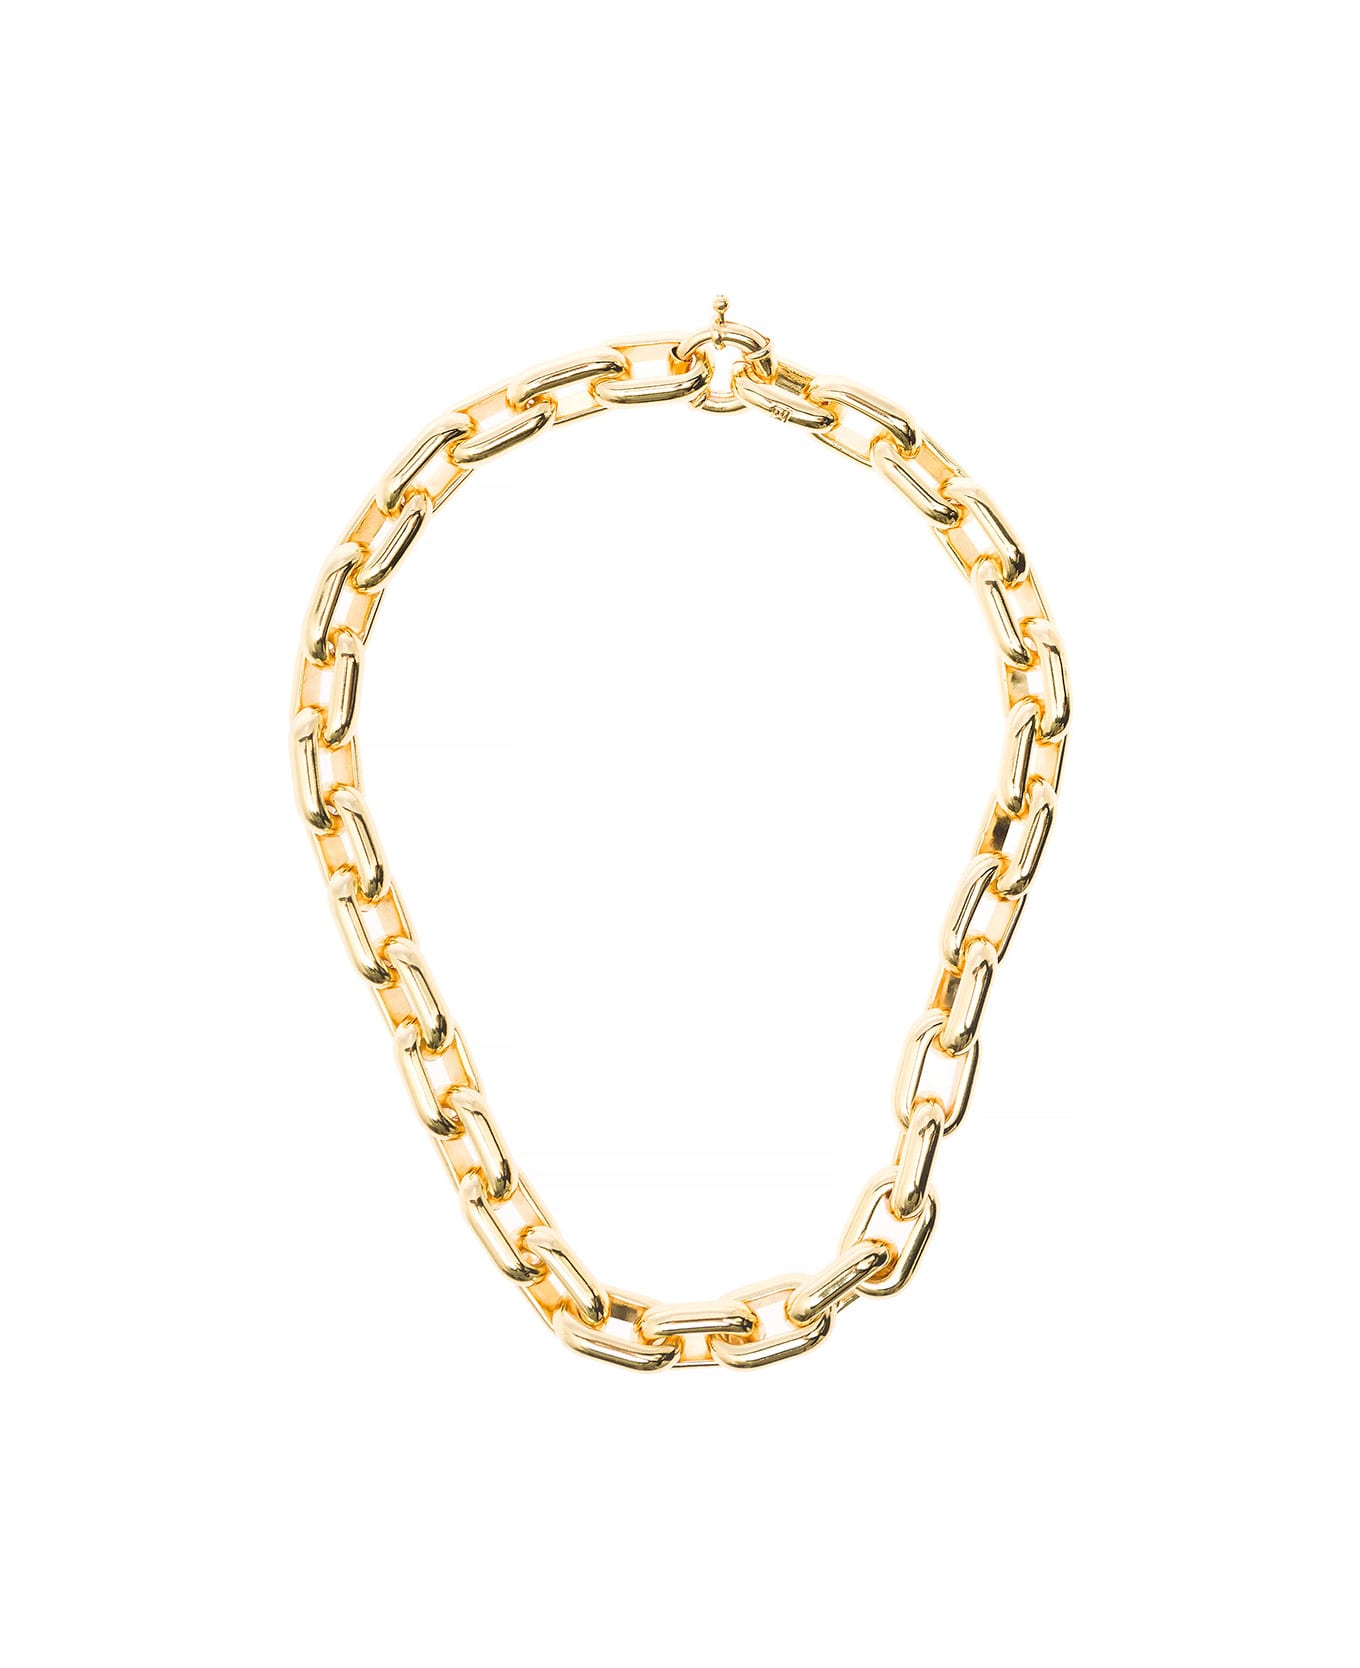 Federica Tosi 'lace Ella' 18k Gold Plated Bronze Chain Necklace Woman Tosi - Golden